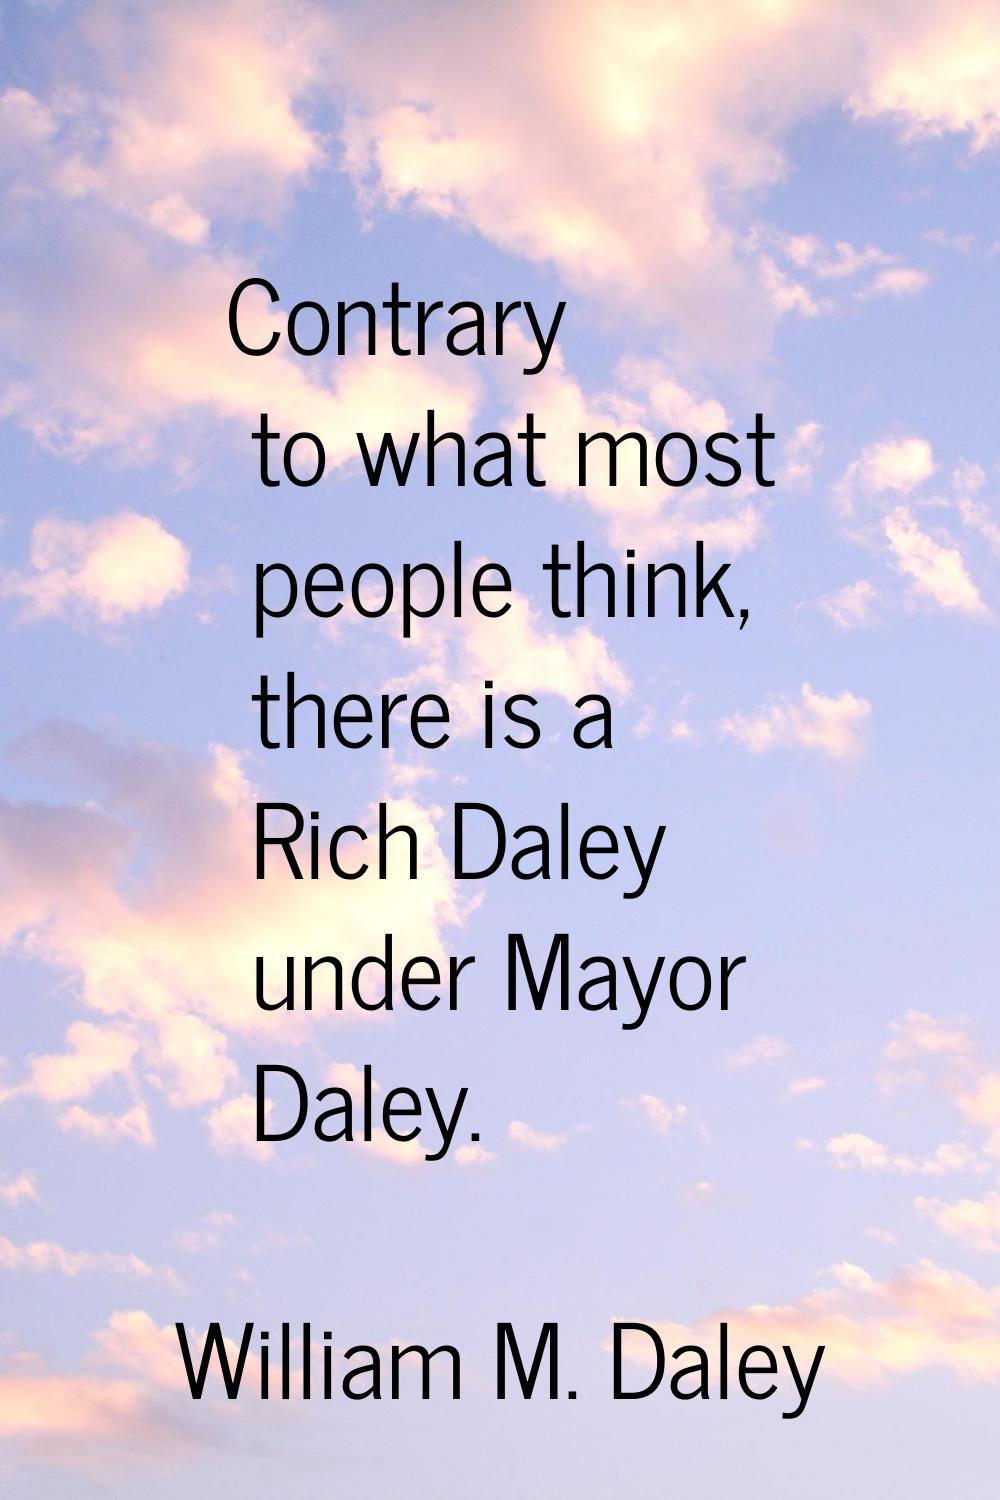 Contrary to what most people think, there is a Rich Daley under Mayor Daley.